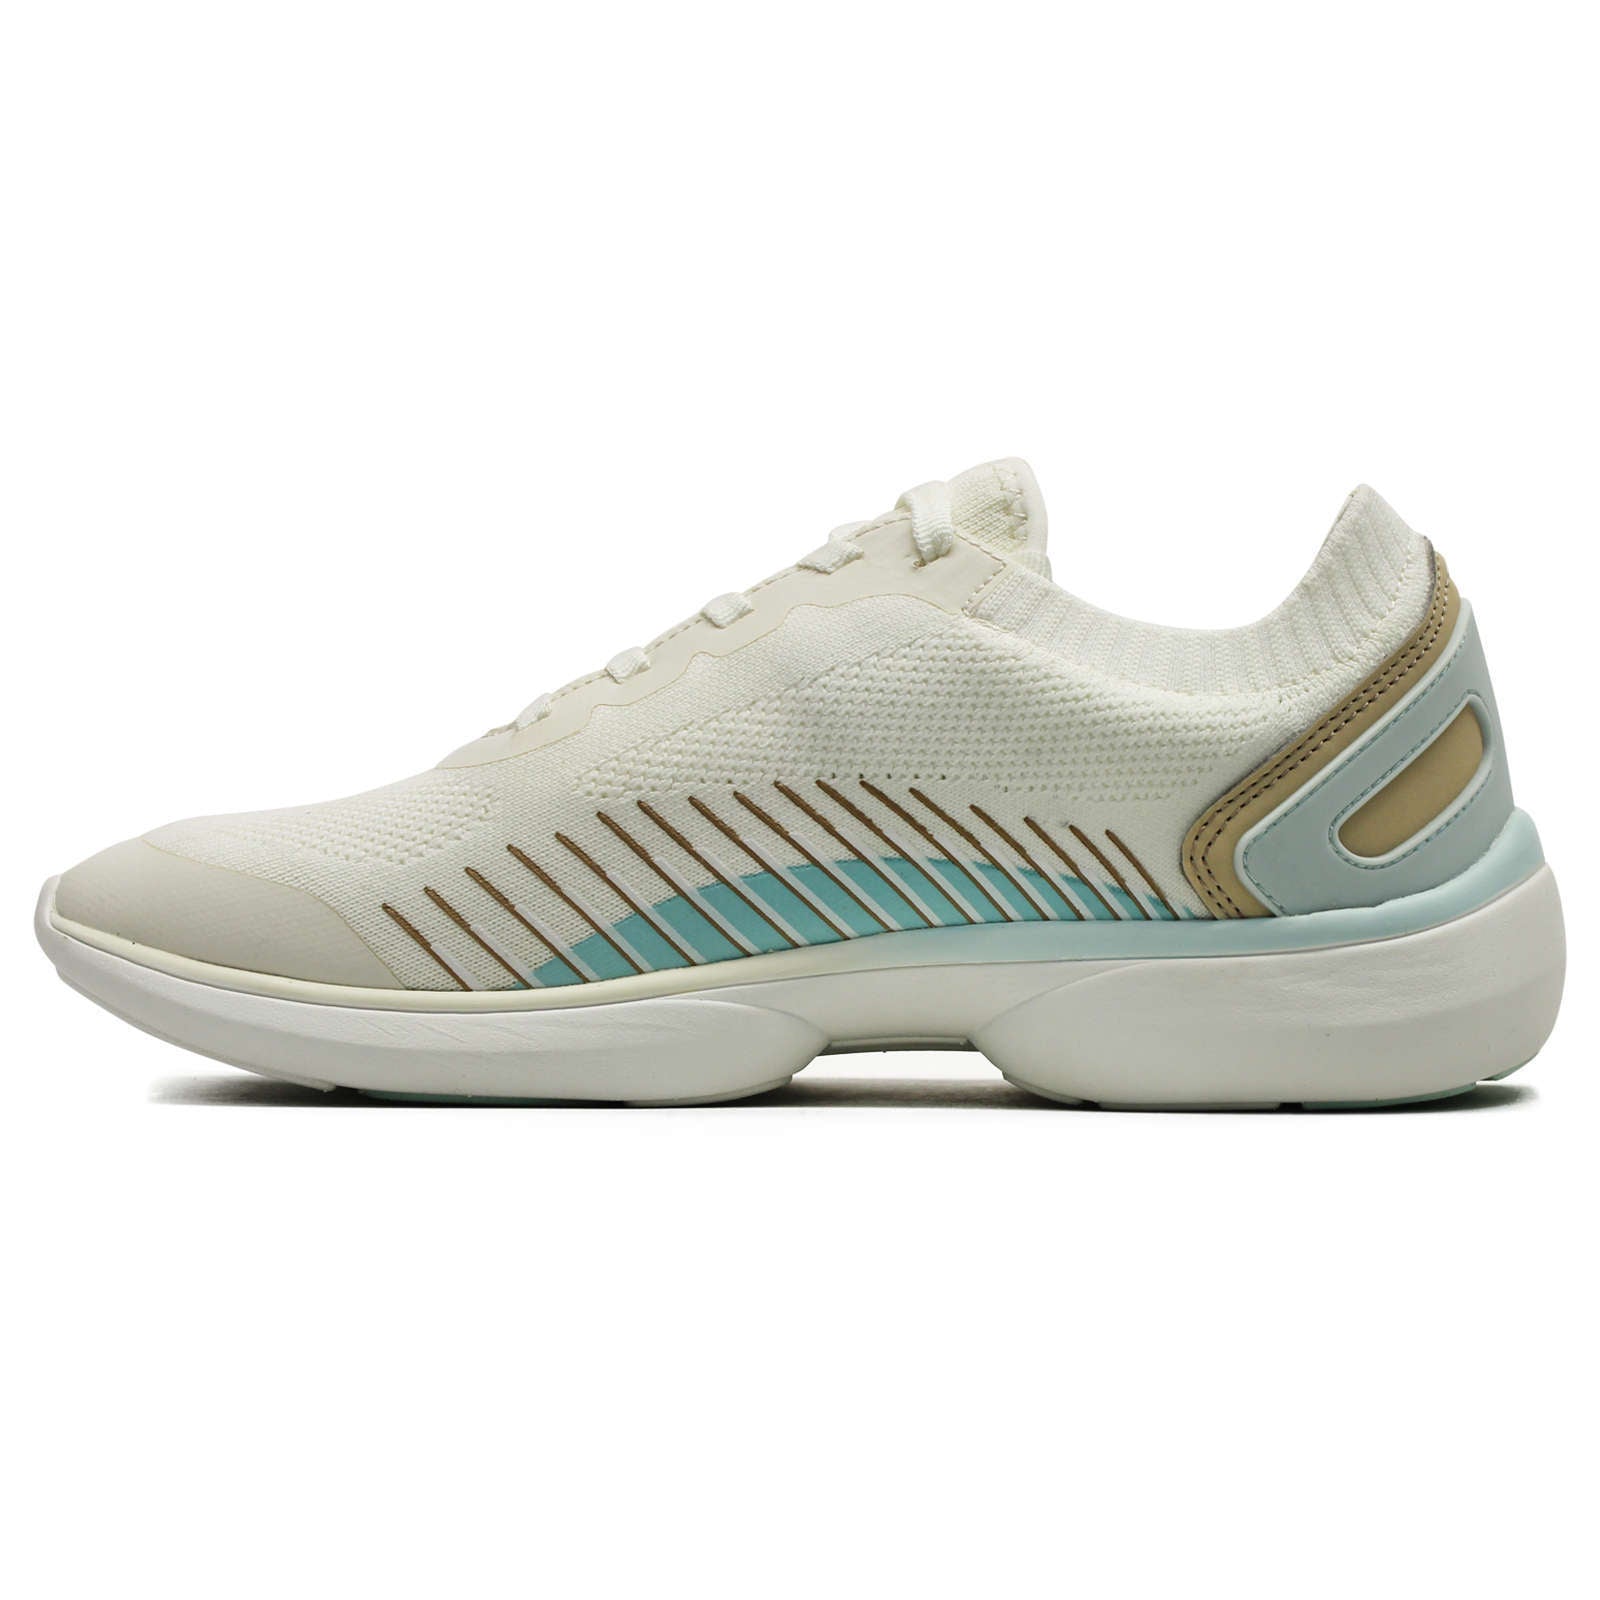 Vionic Embolden Synthetic Textile Womens Trainers#color_marshmallow semolina